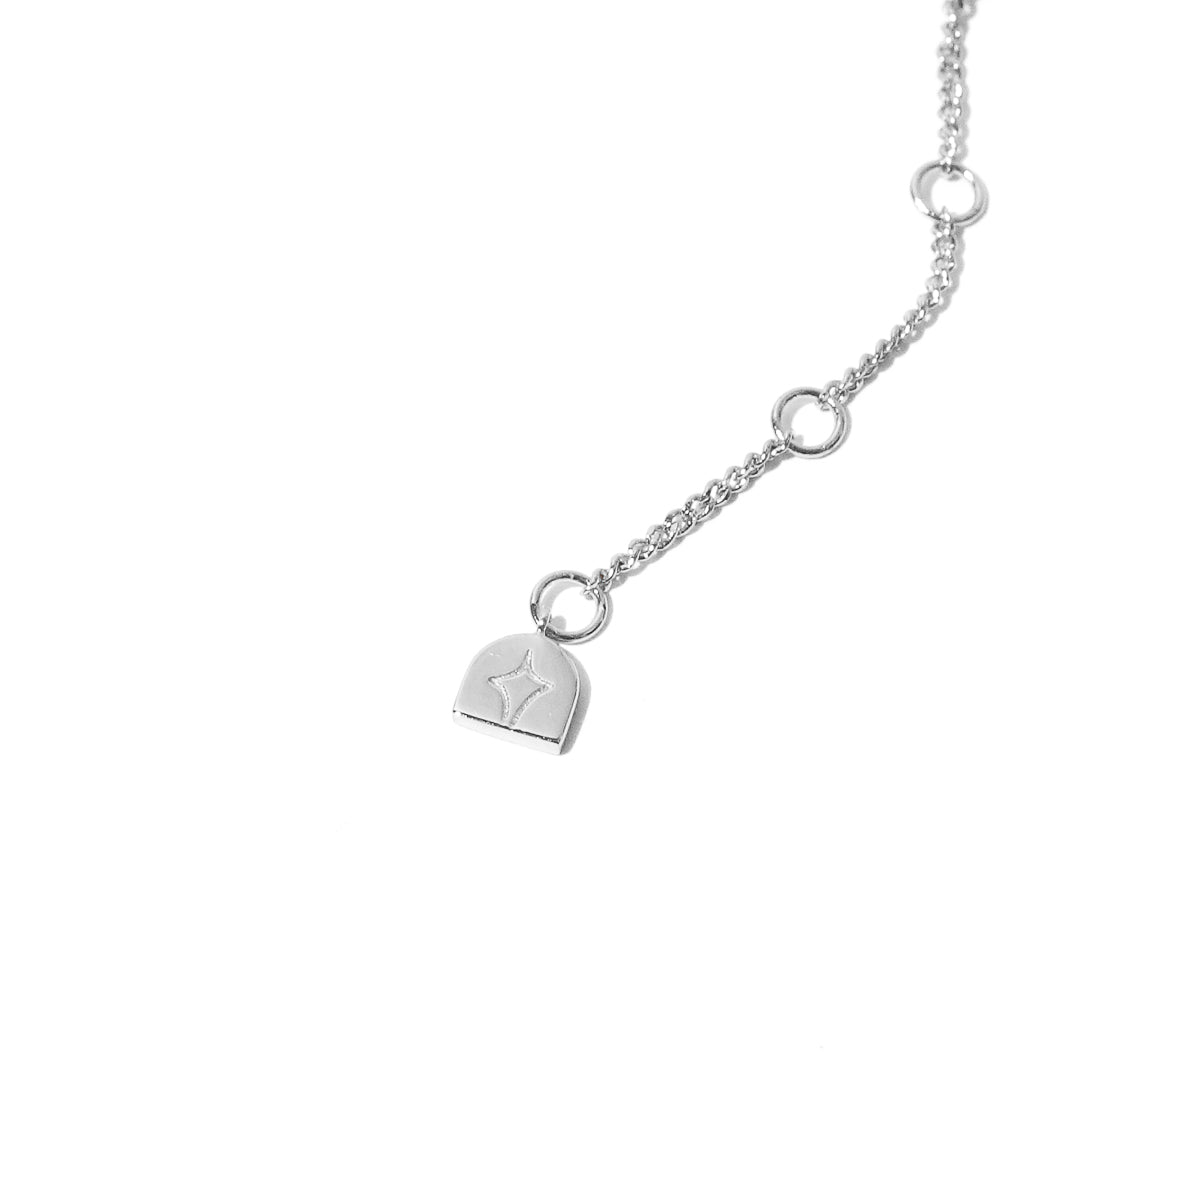 Cosmic Star Bar Necklace in Silver end of the necklace charm